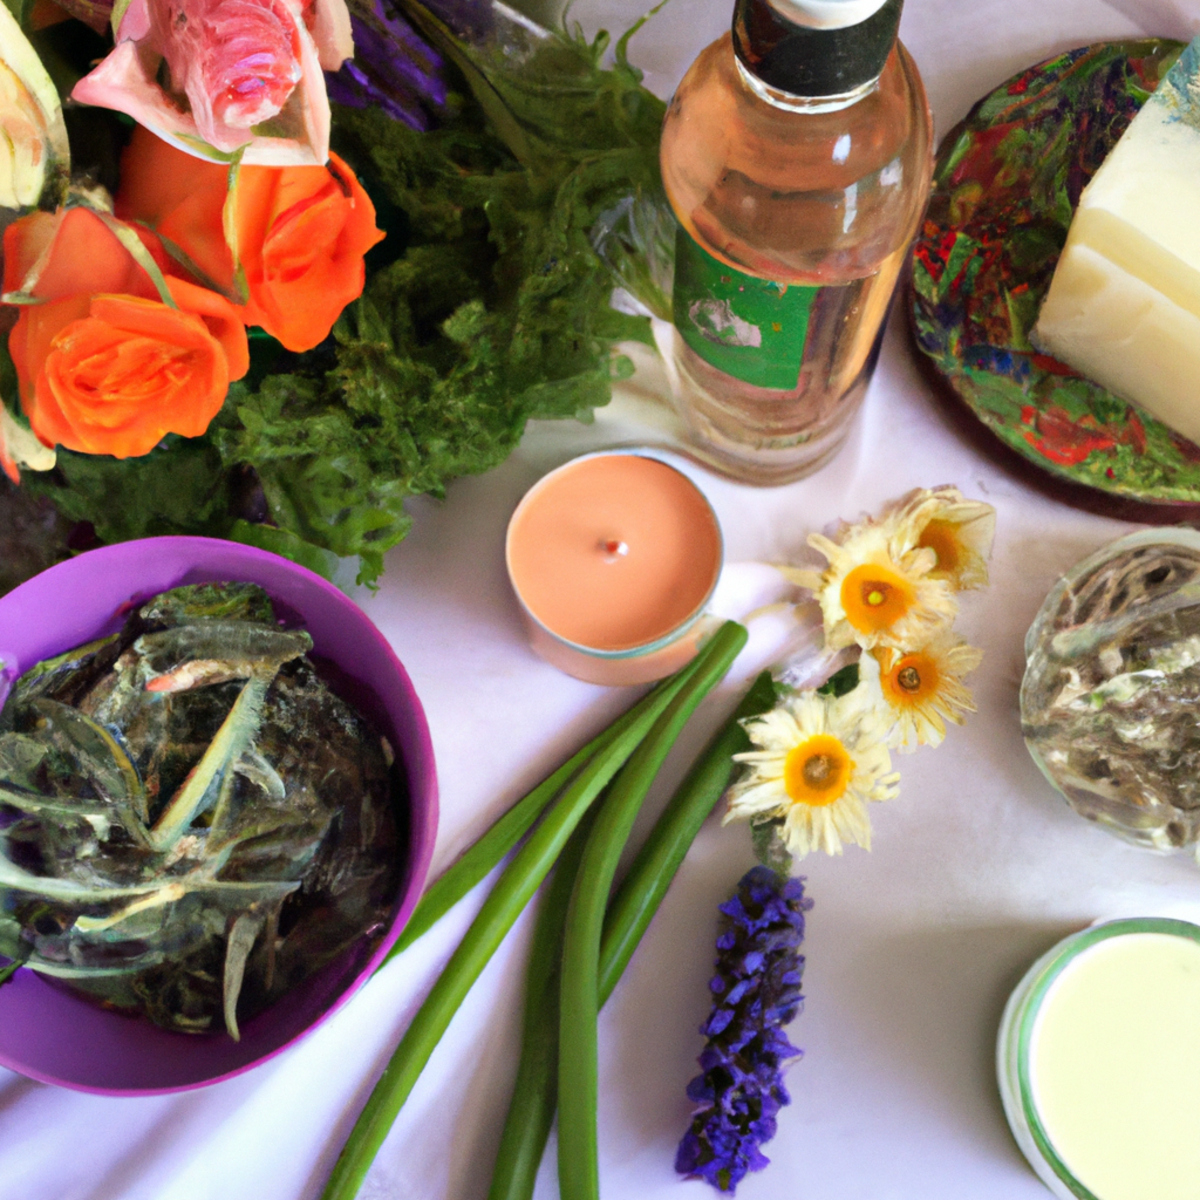 Harmonious display of natural beauty remedies: flowers, skincare products, and rejuvenating masks for youthful skin.